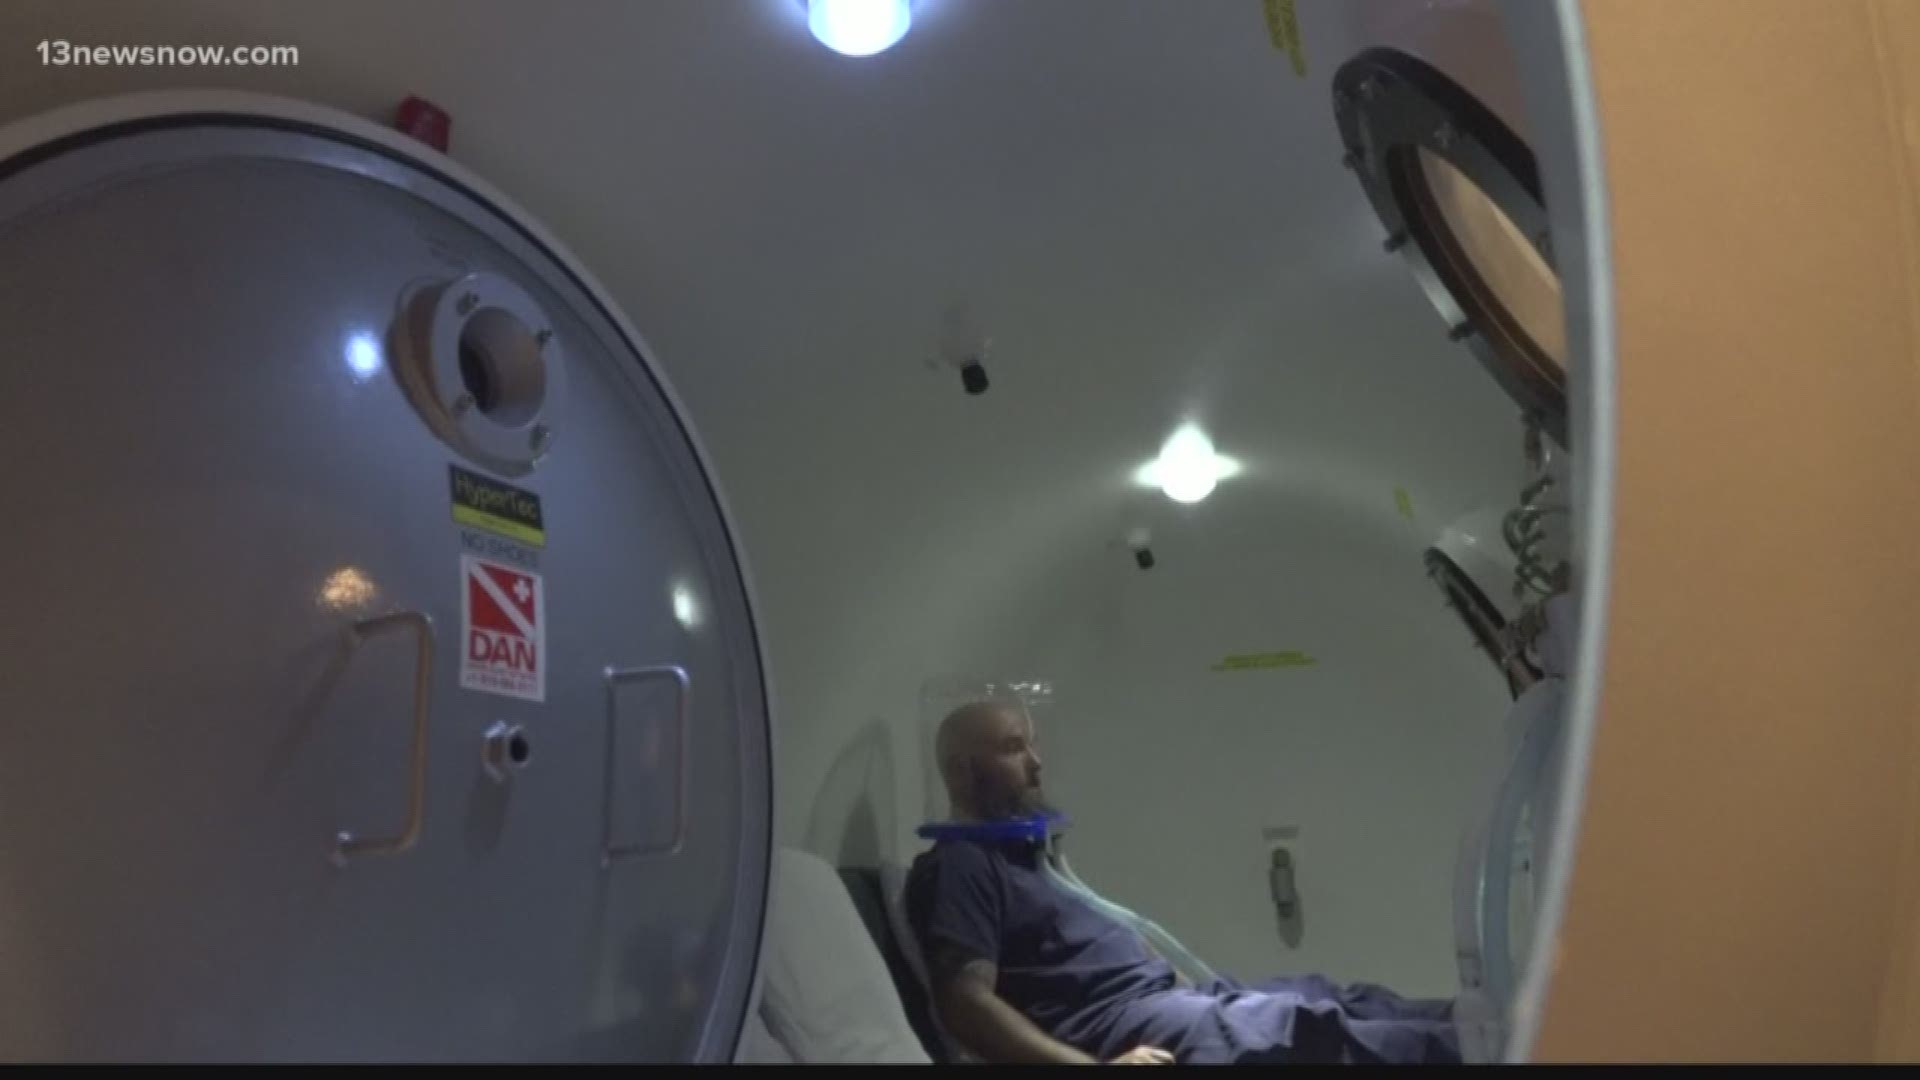 'Hyperbaric Oxygen Therapy' is helping veterans.